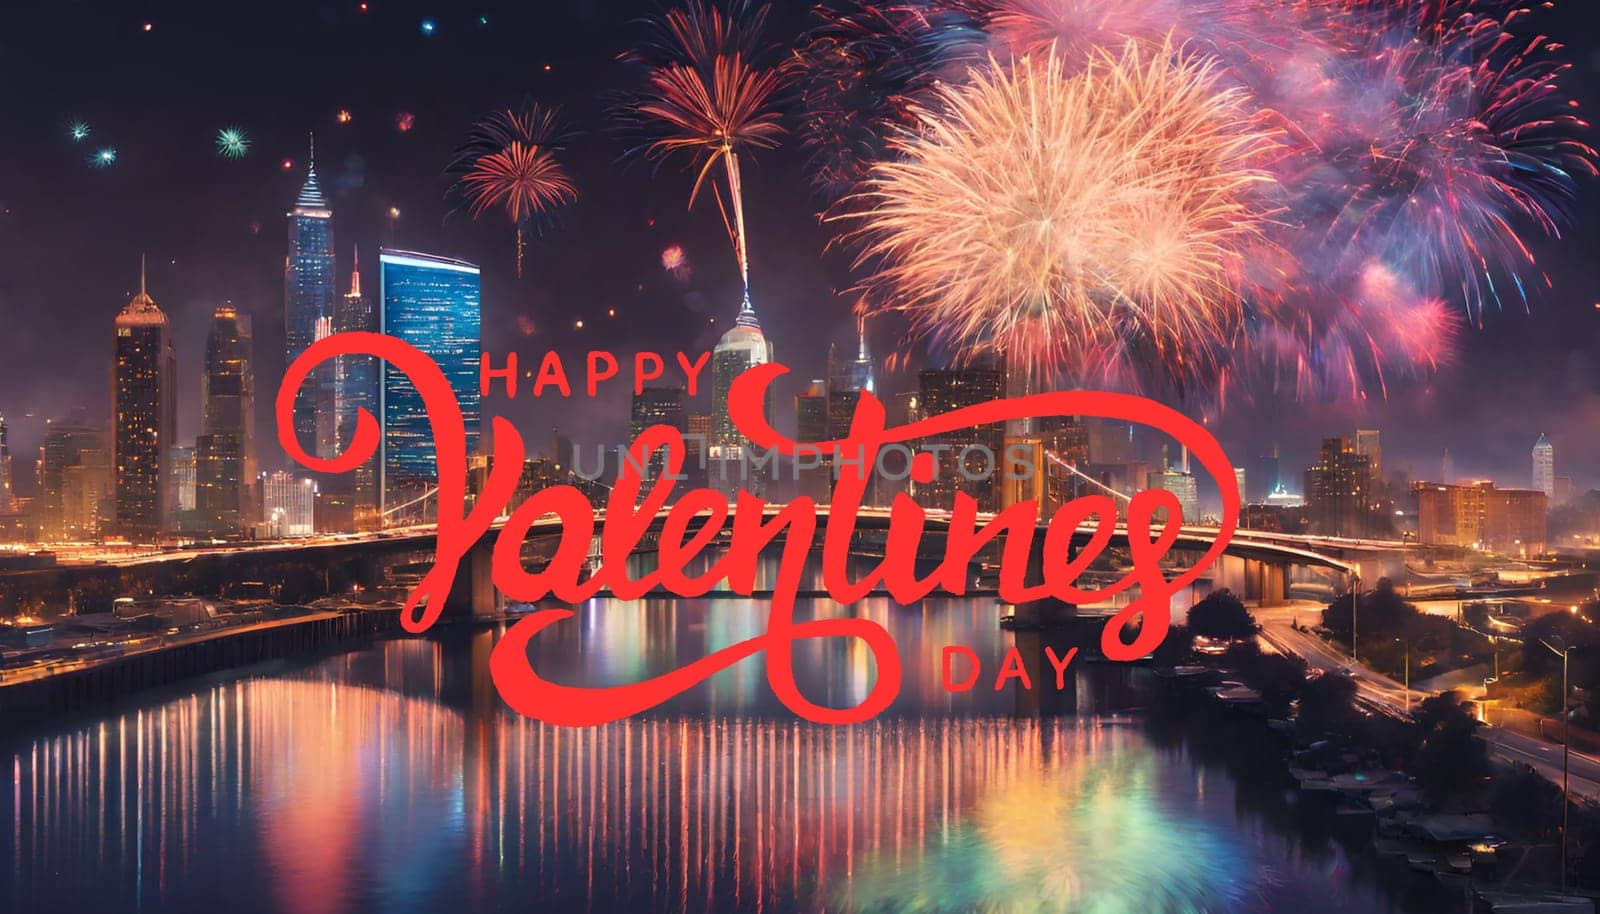 valentine's day. A city skyline at night with colorful lights and fireworks. The buildings are tall and modern, and the sky is dark and starry. c